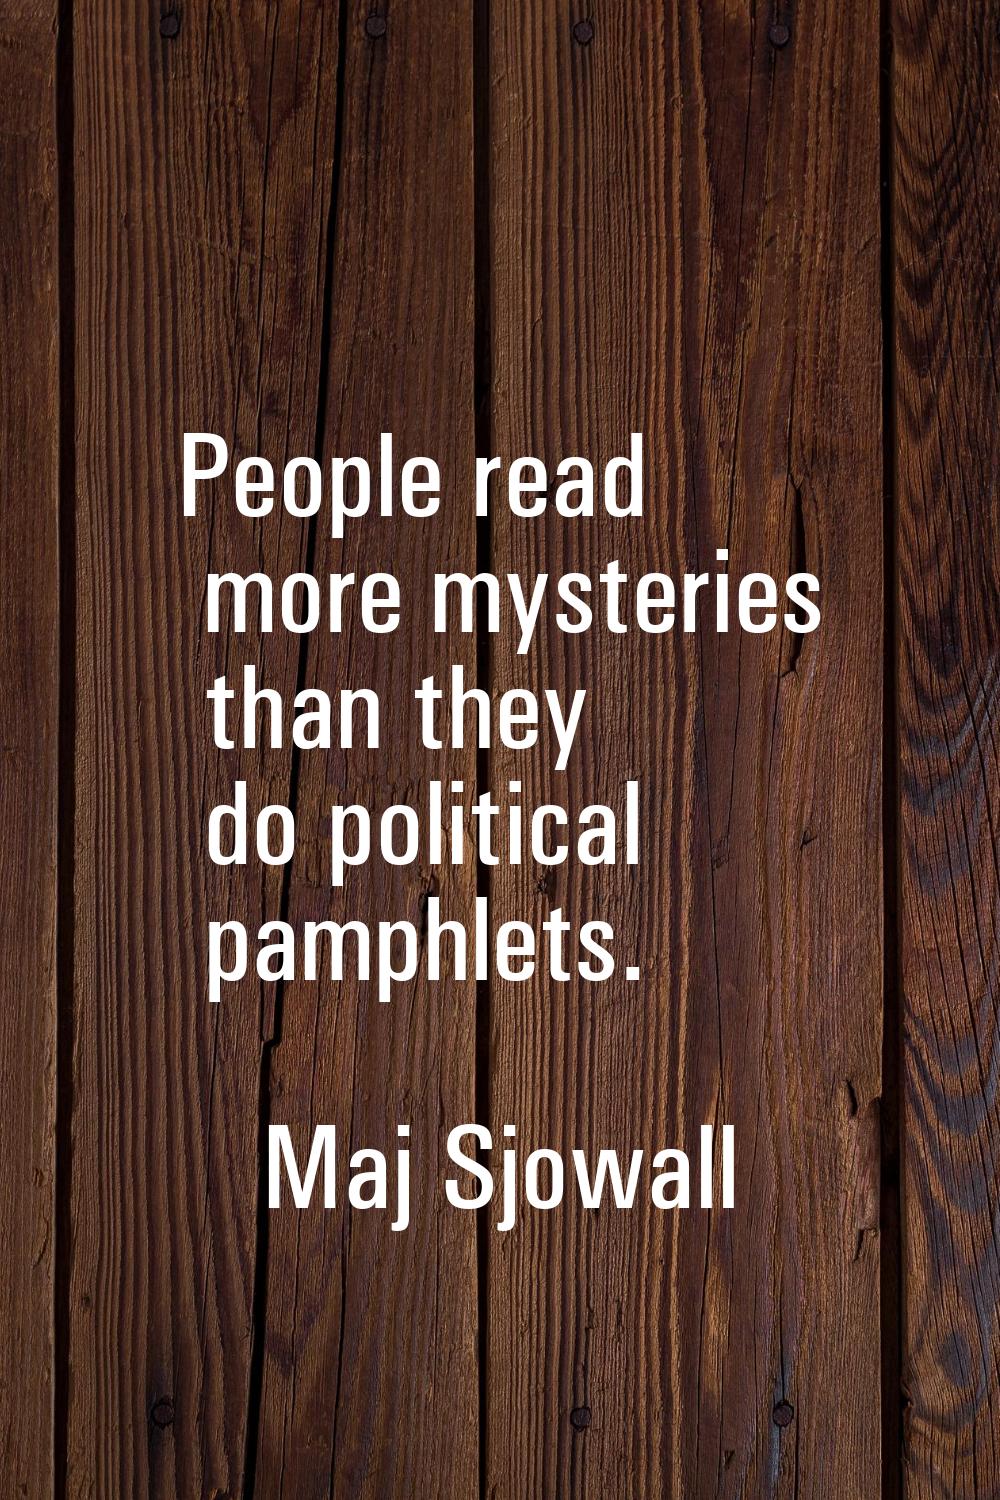 People read more mysteries than they do political pamphlets.